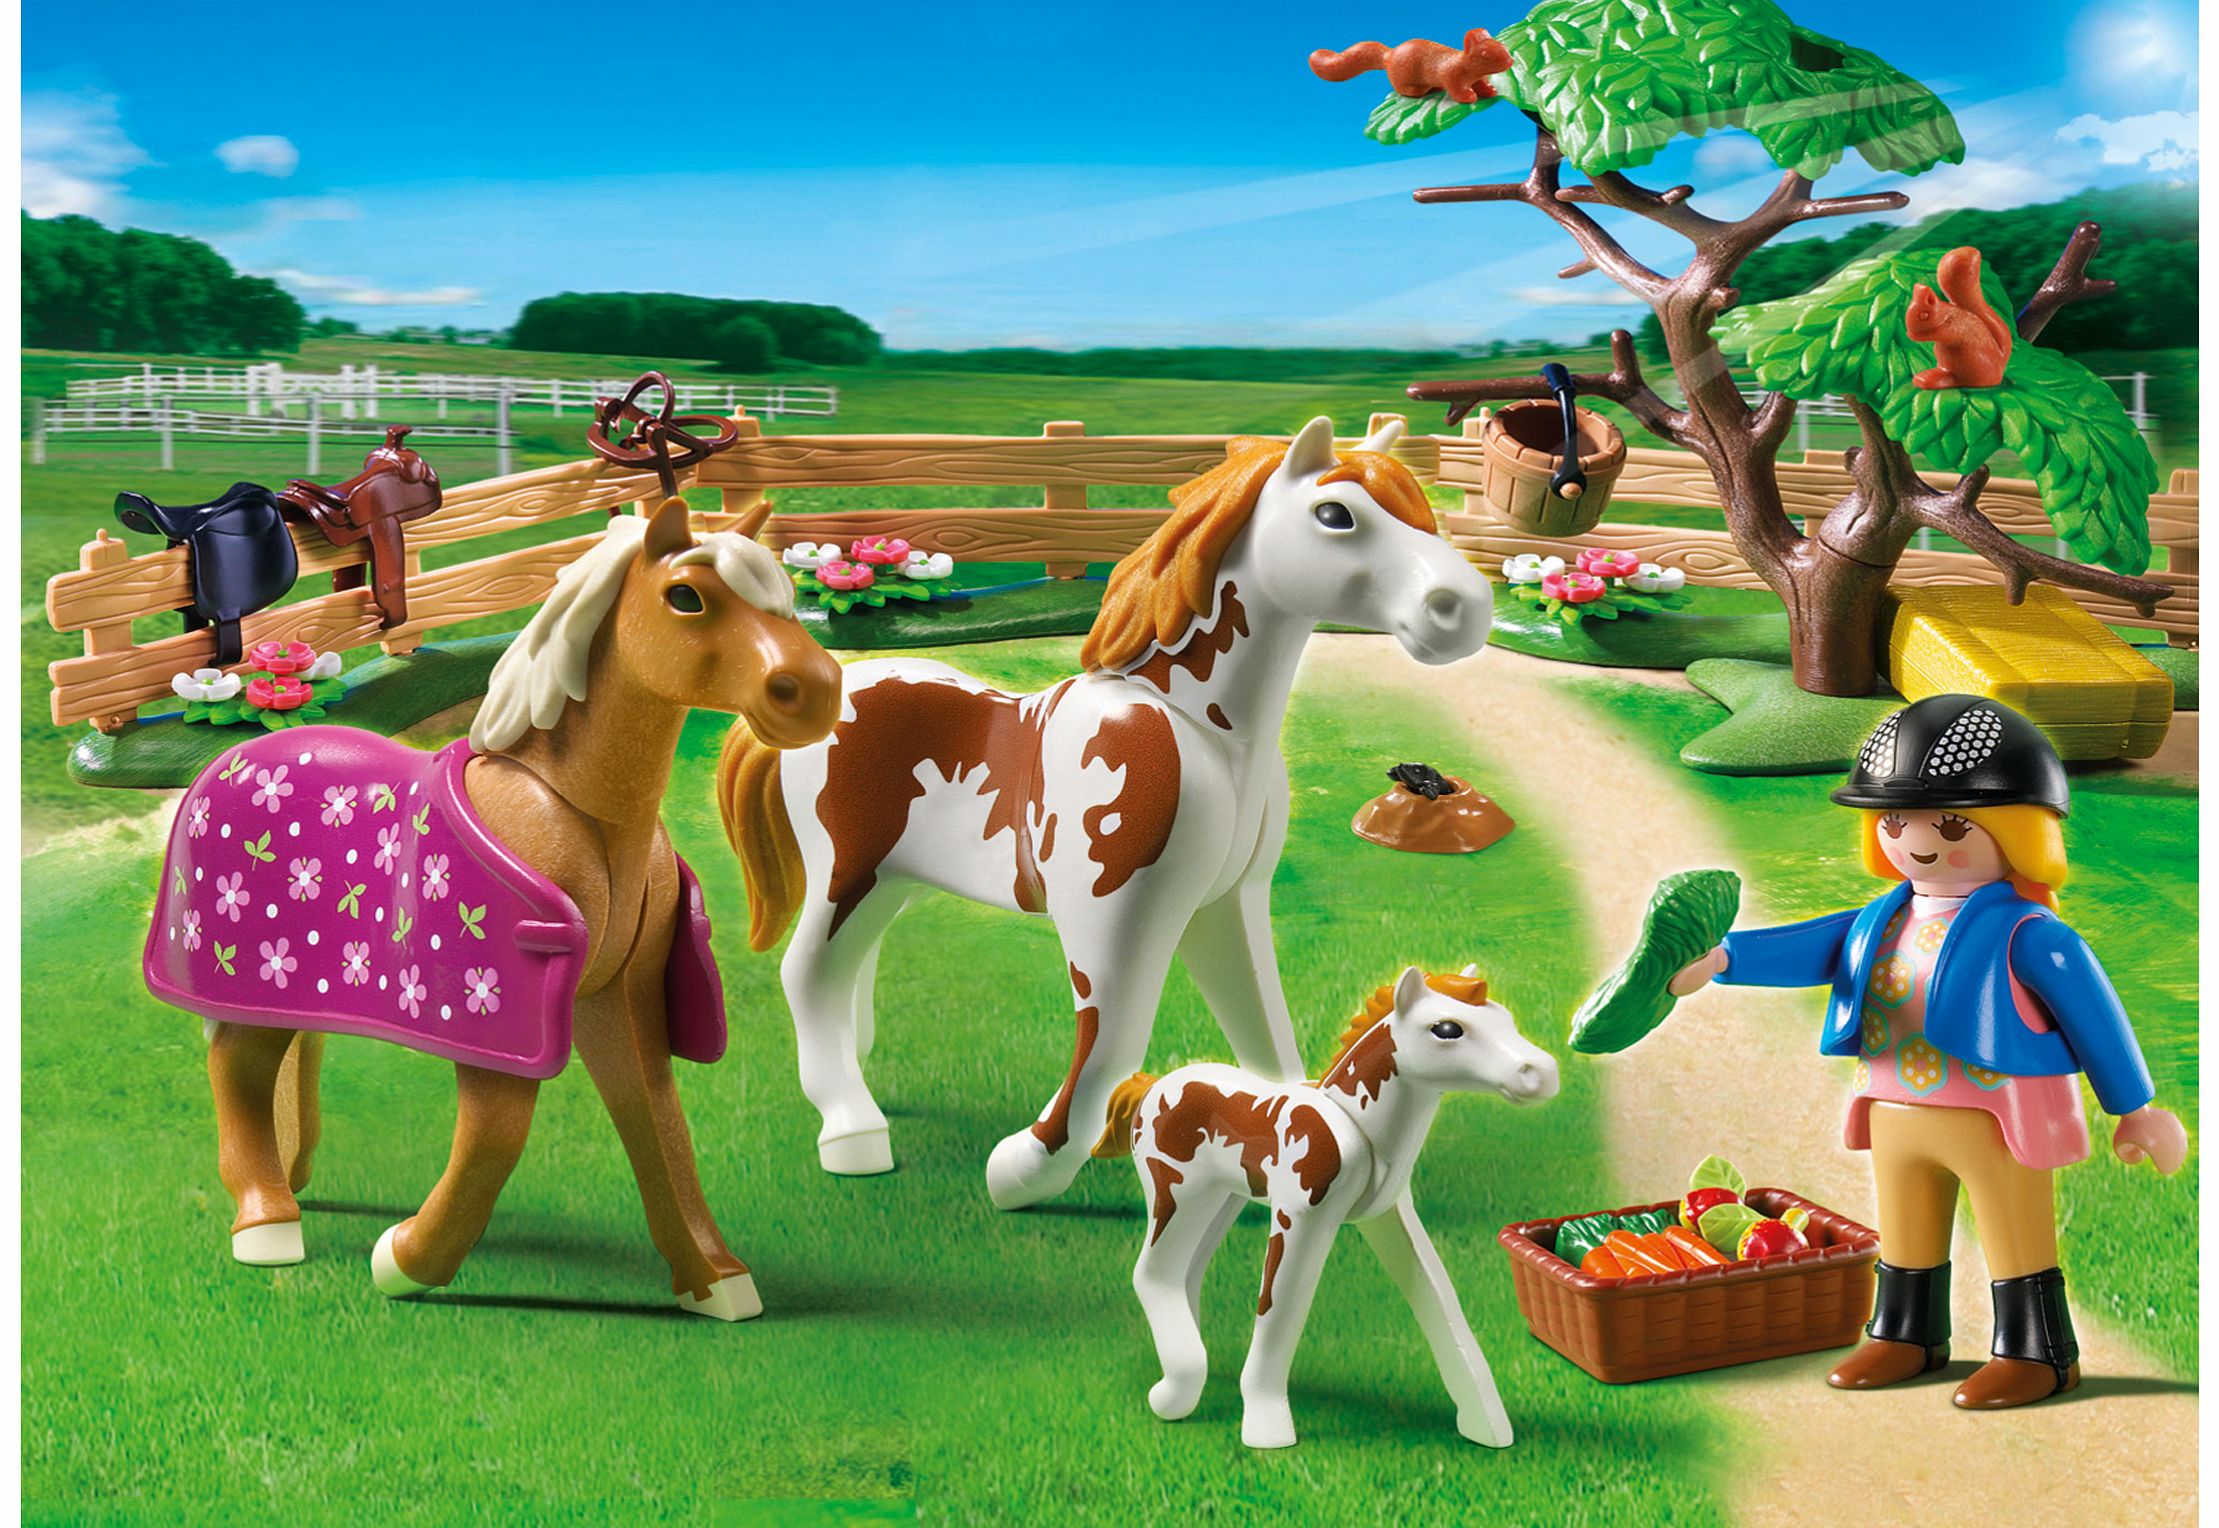 PLAYMOBIL Paddock With Horses and Pony 5227